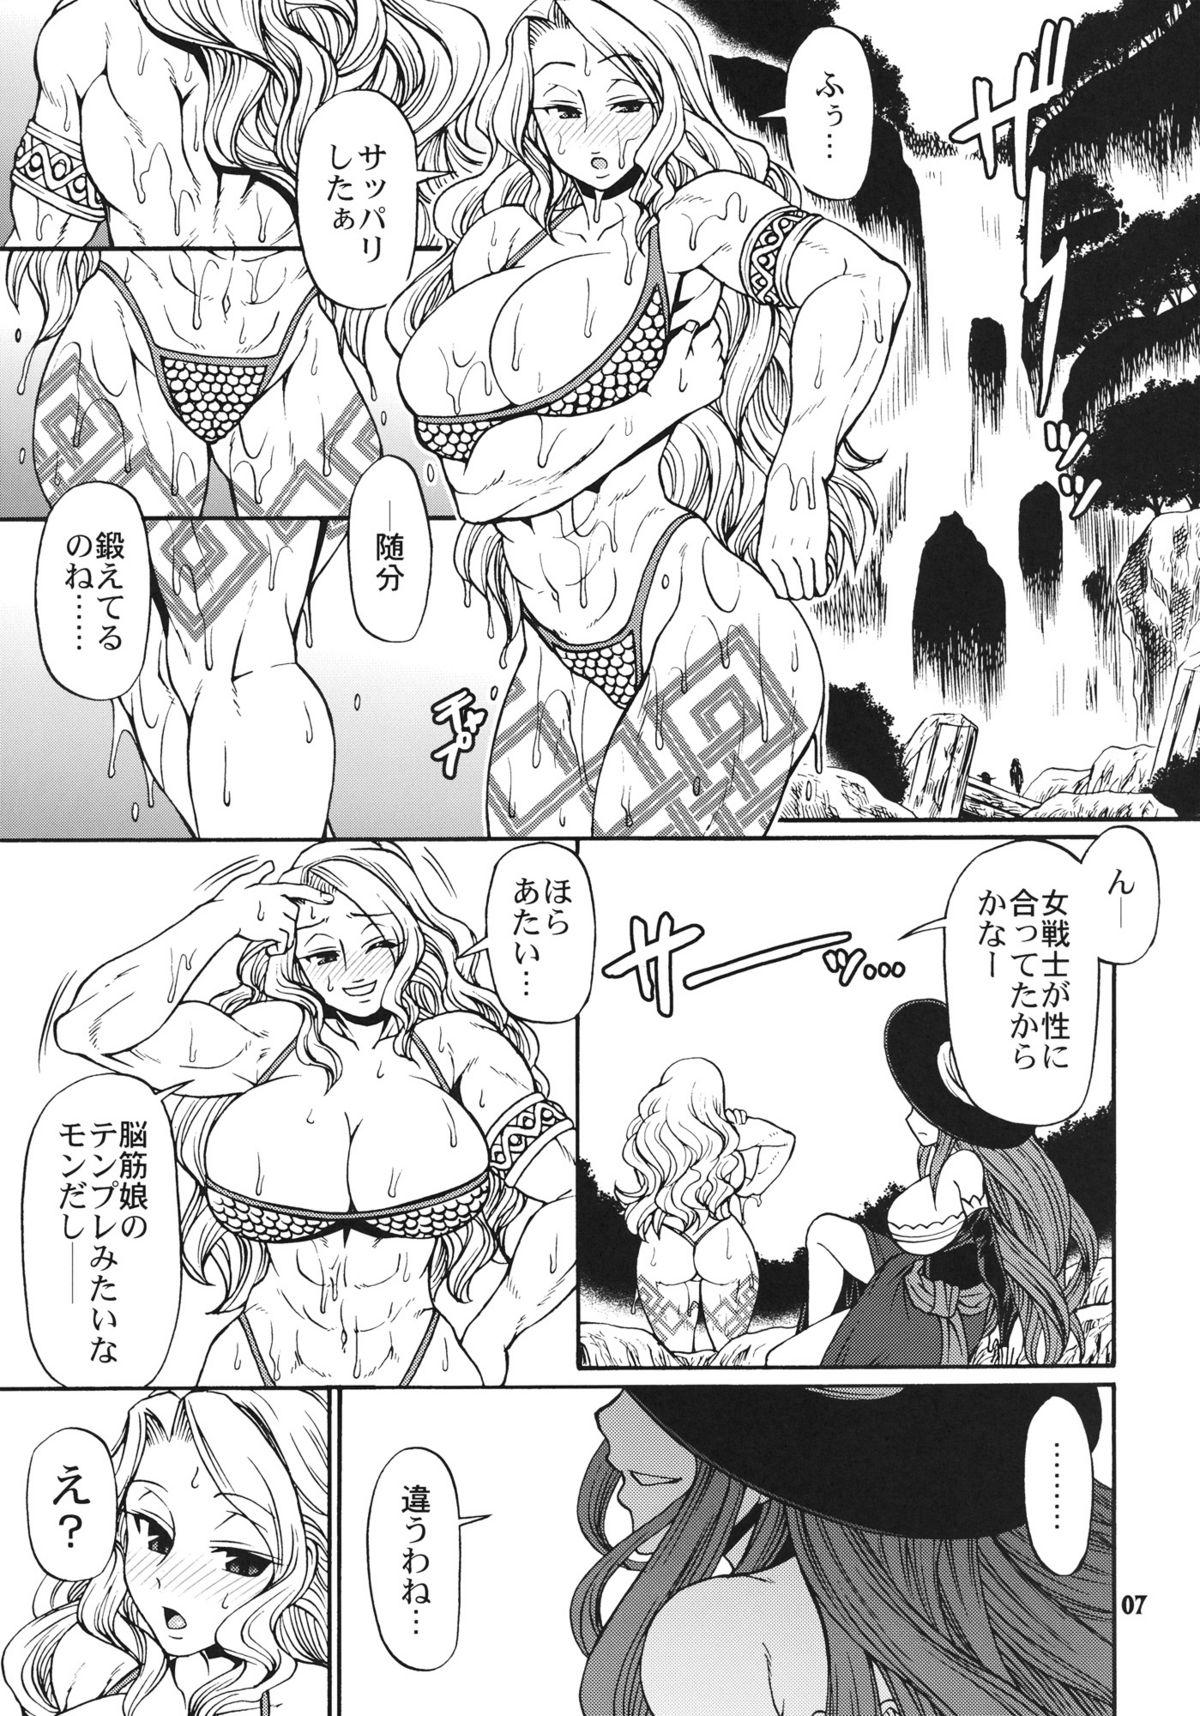 Whore PARTY HARD - Dragons crown Bbc - Page 6